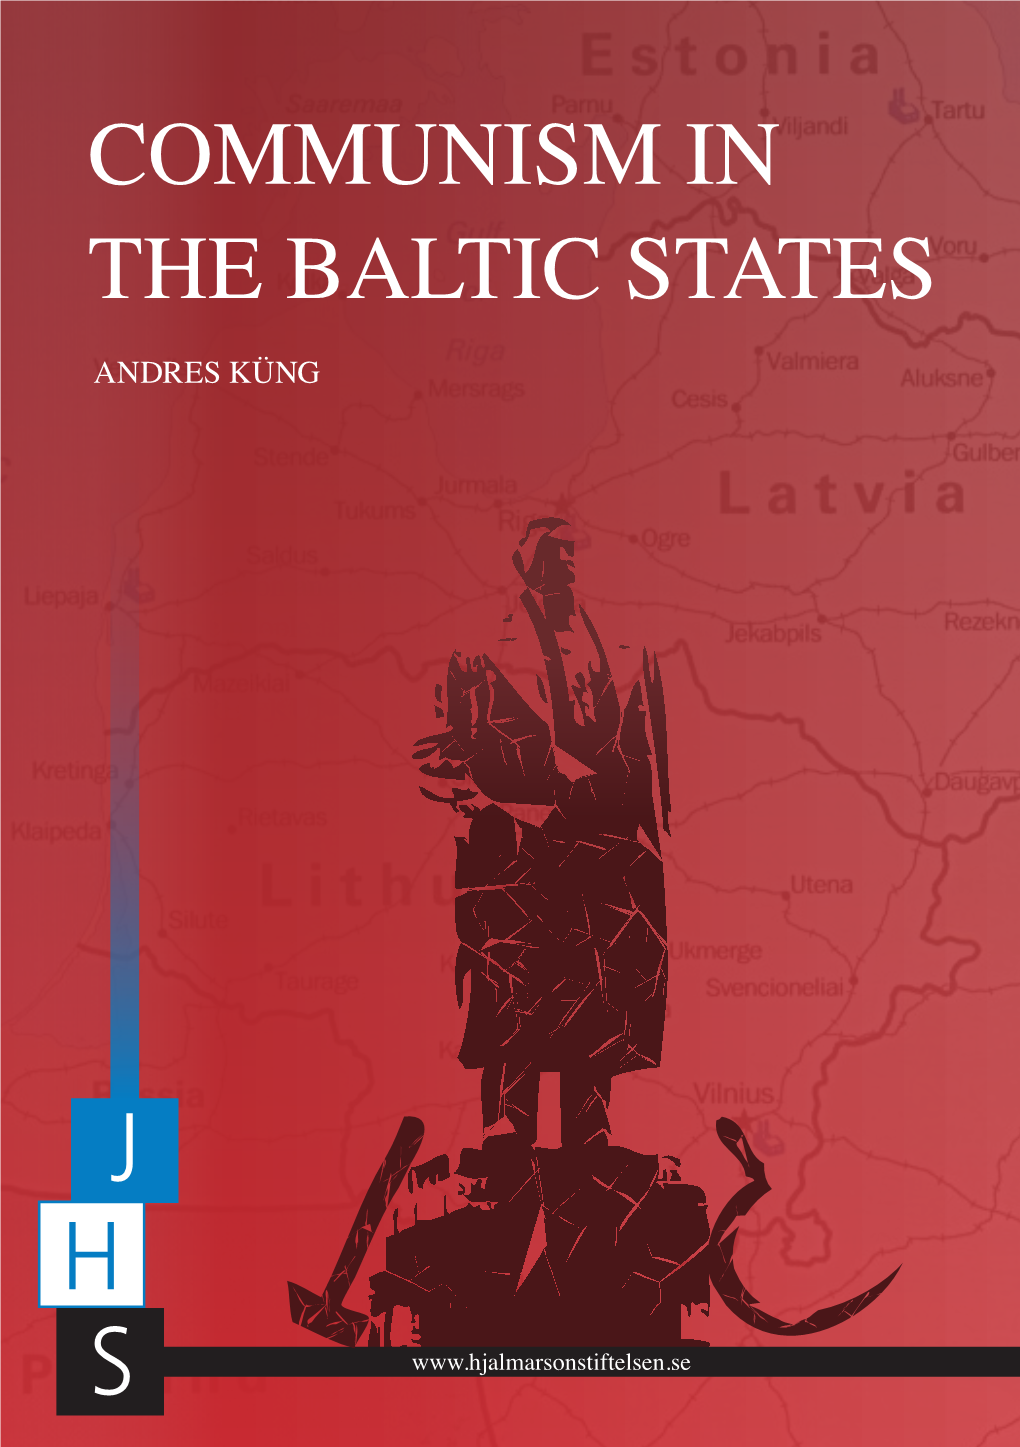 Communism in the Baltic States ANDRES KÜNG